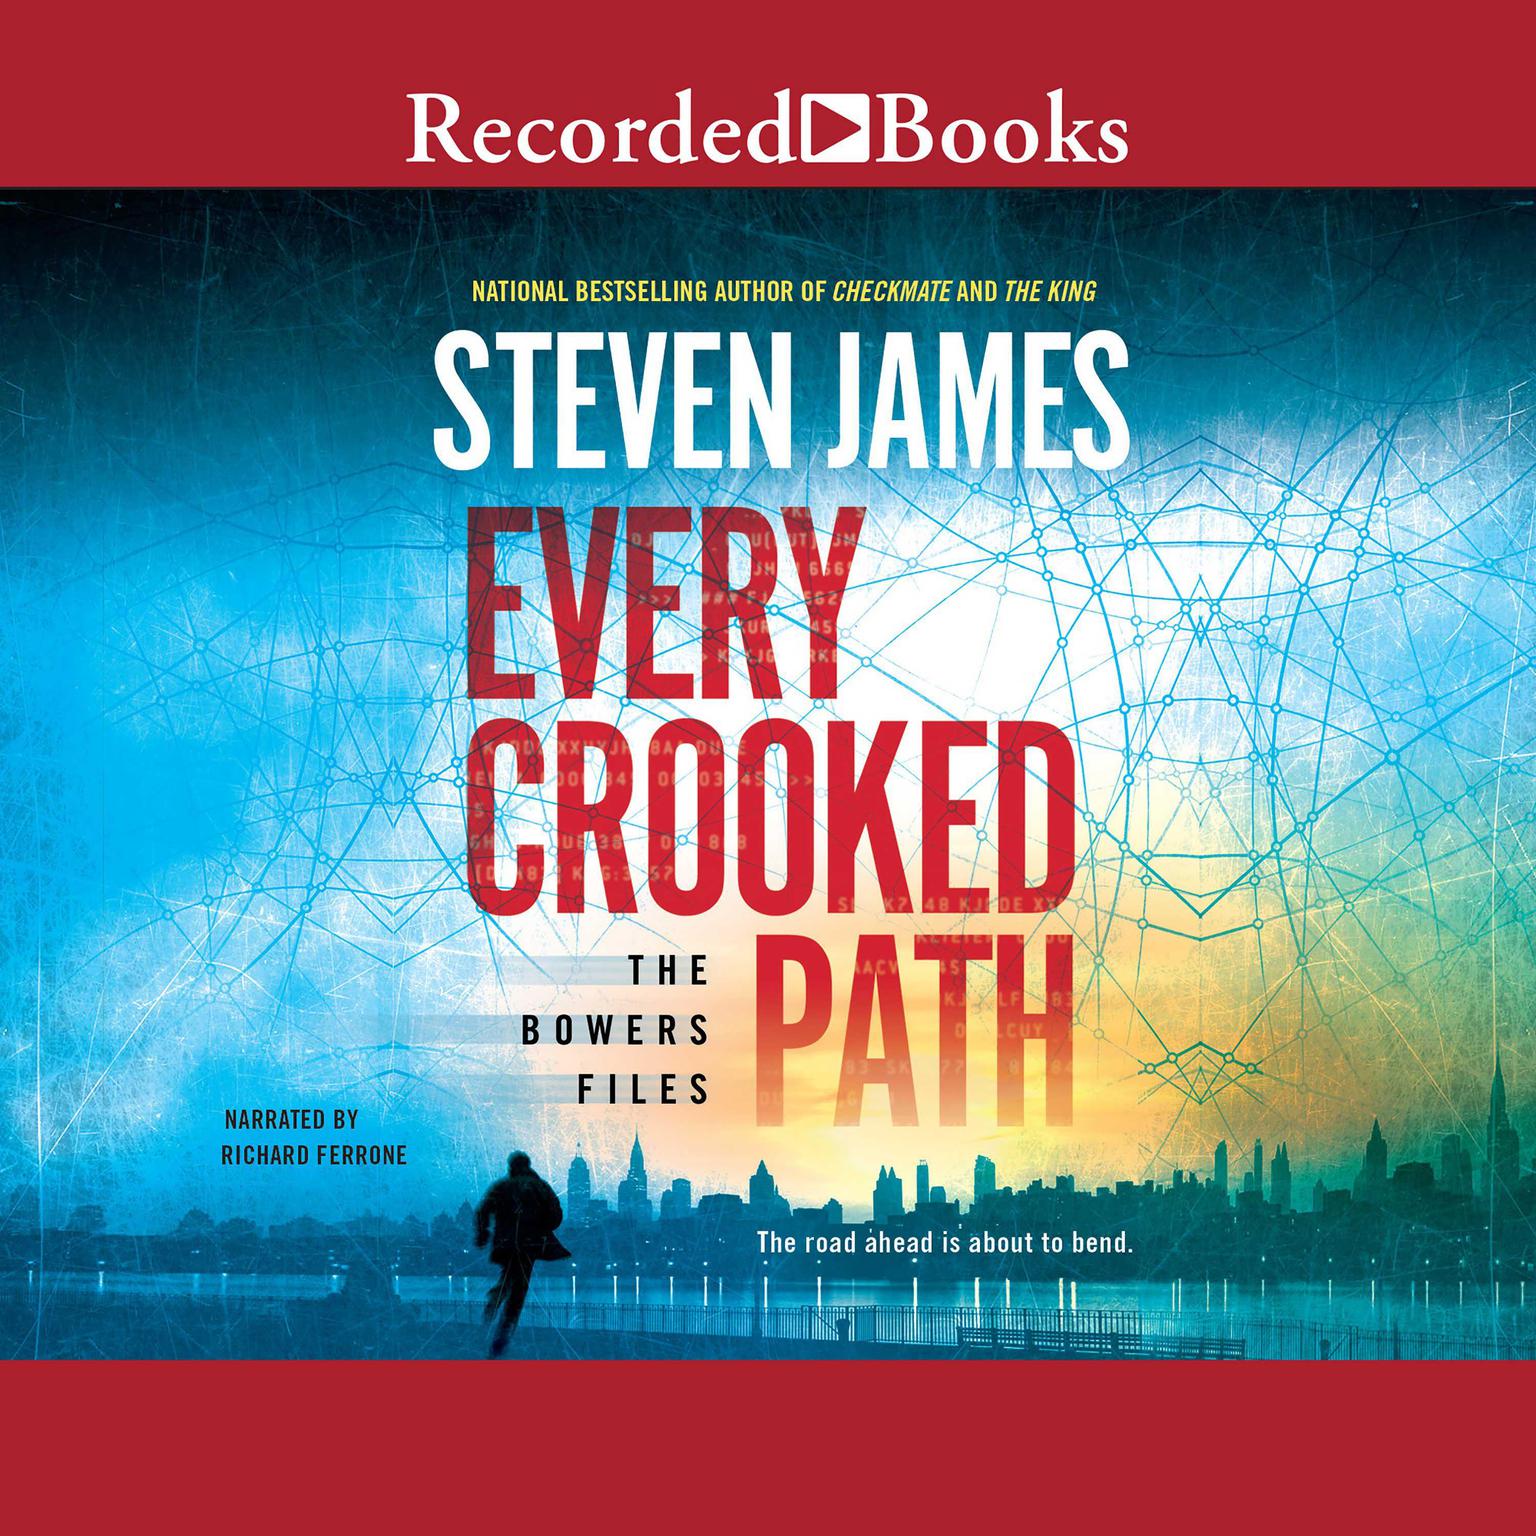 Every Crooked Path: The Bowers Files Audiobook, by Steven James